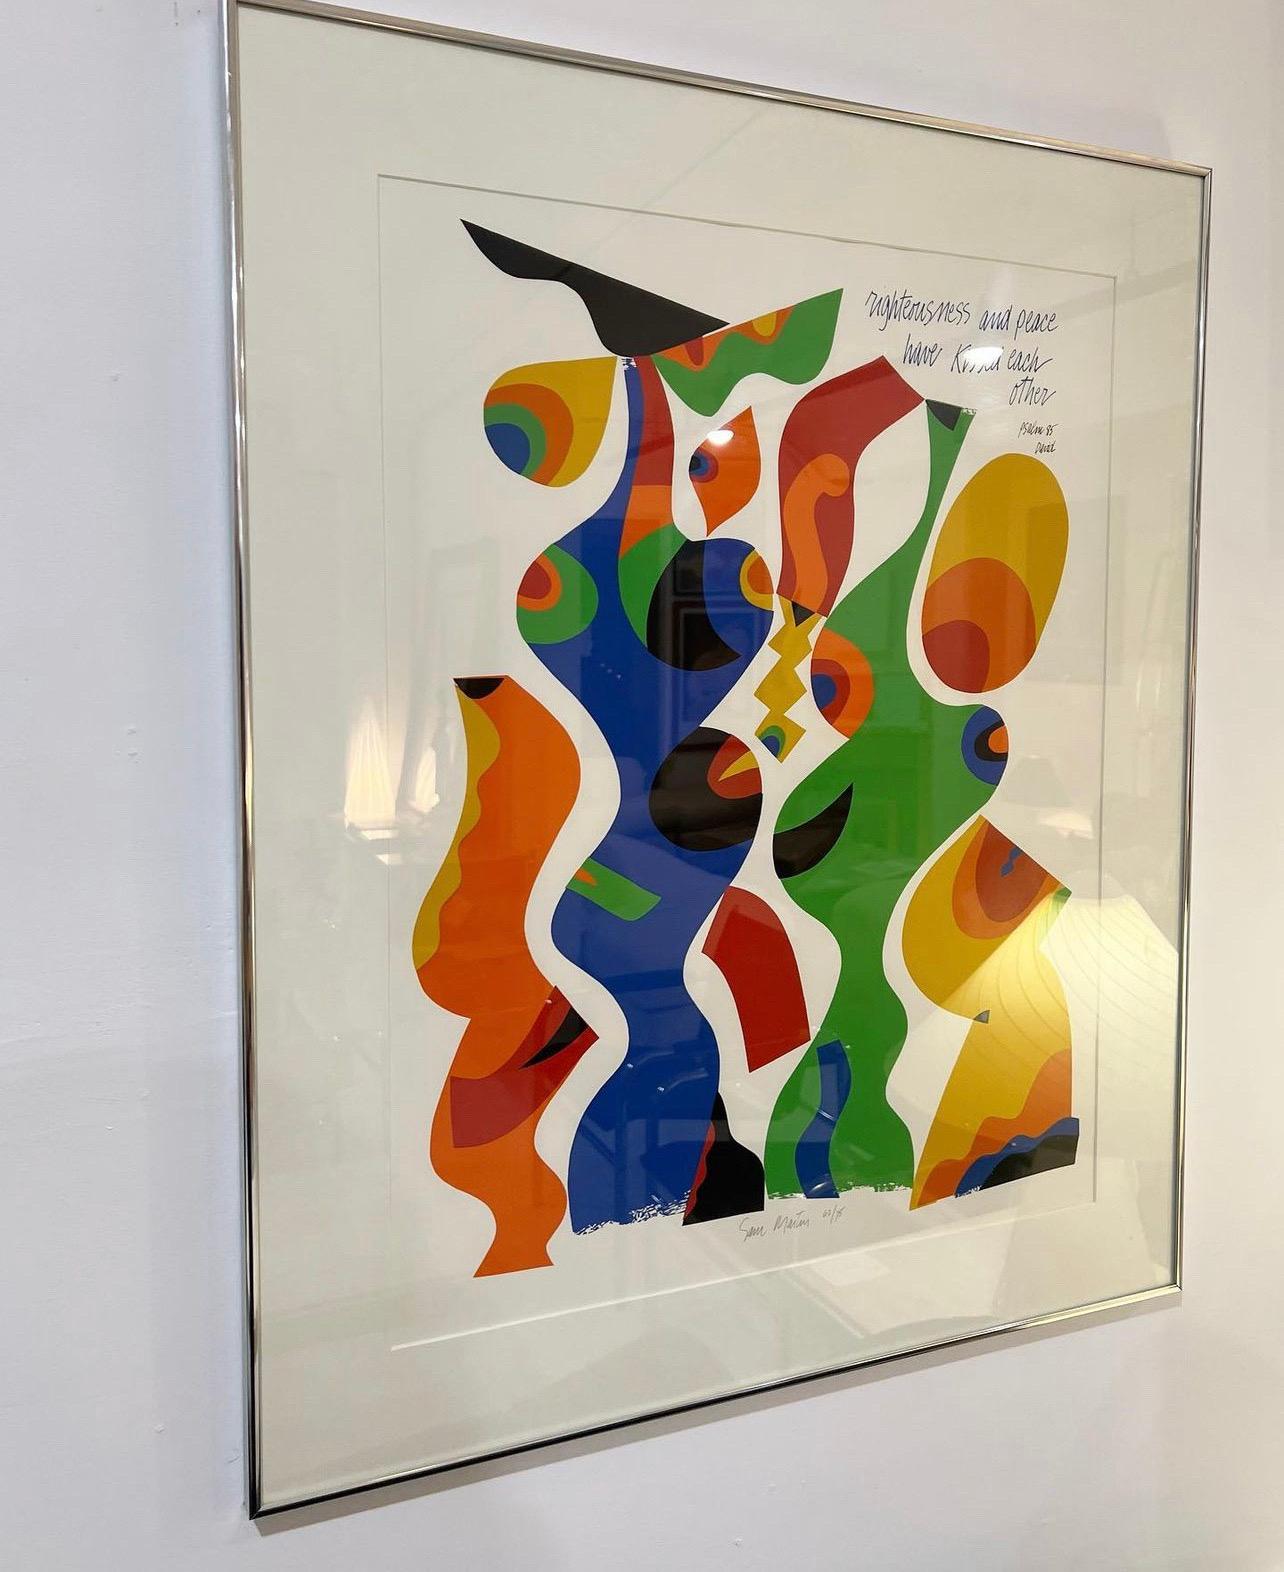 RARE - Vintage Lithograph signed Sam Maitin and numbered 62/75 

A painter, printmaker, sculptor, muralist, and graphic designer, Maitin was a prolific artist. He had major exhibitions in London, Paris, Frankfurt, Tel Aviv, and Tokyo, and his work